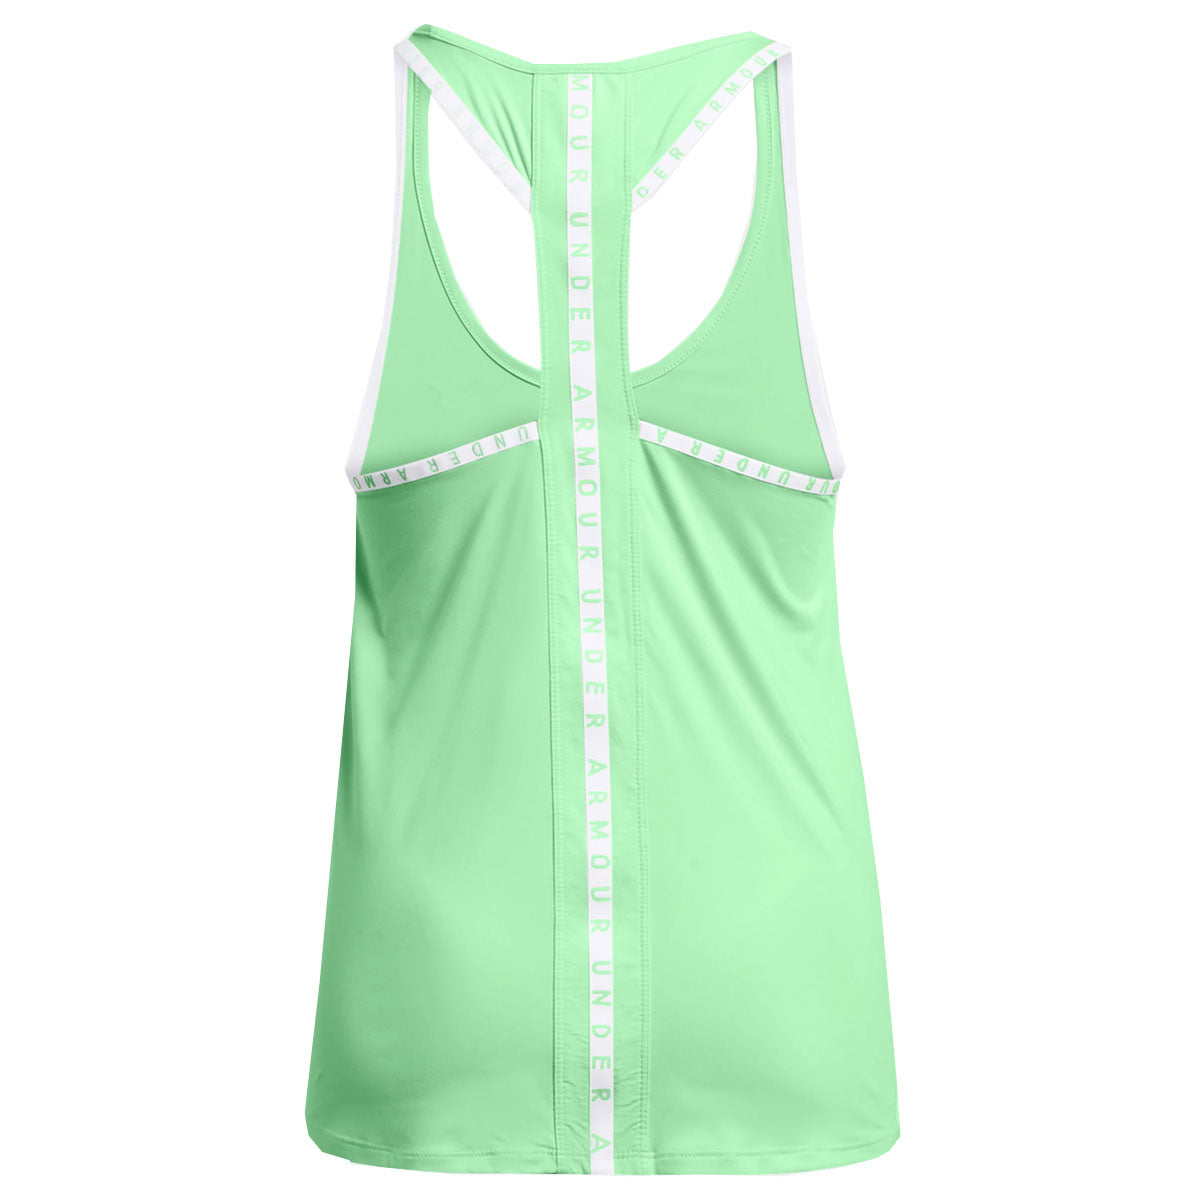 Under Armour Knockout Training Tank Top - Womens - Matrix Green/White